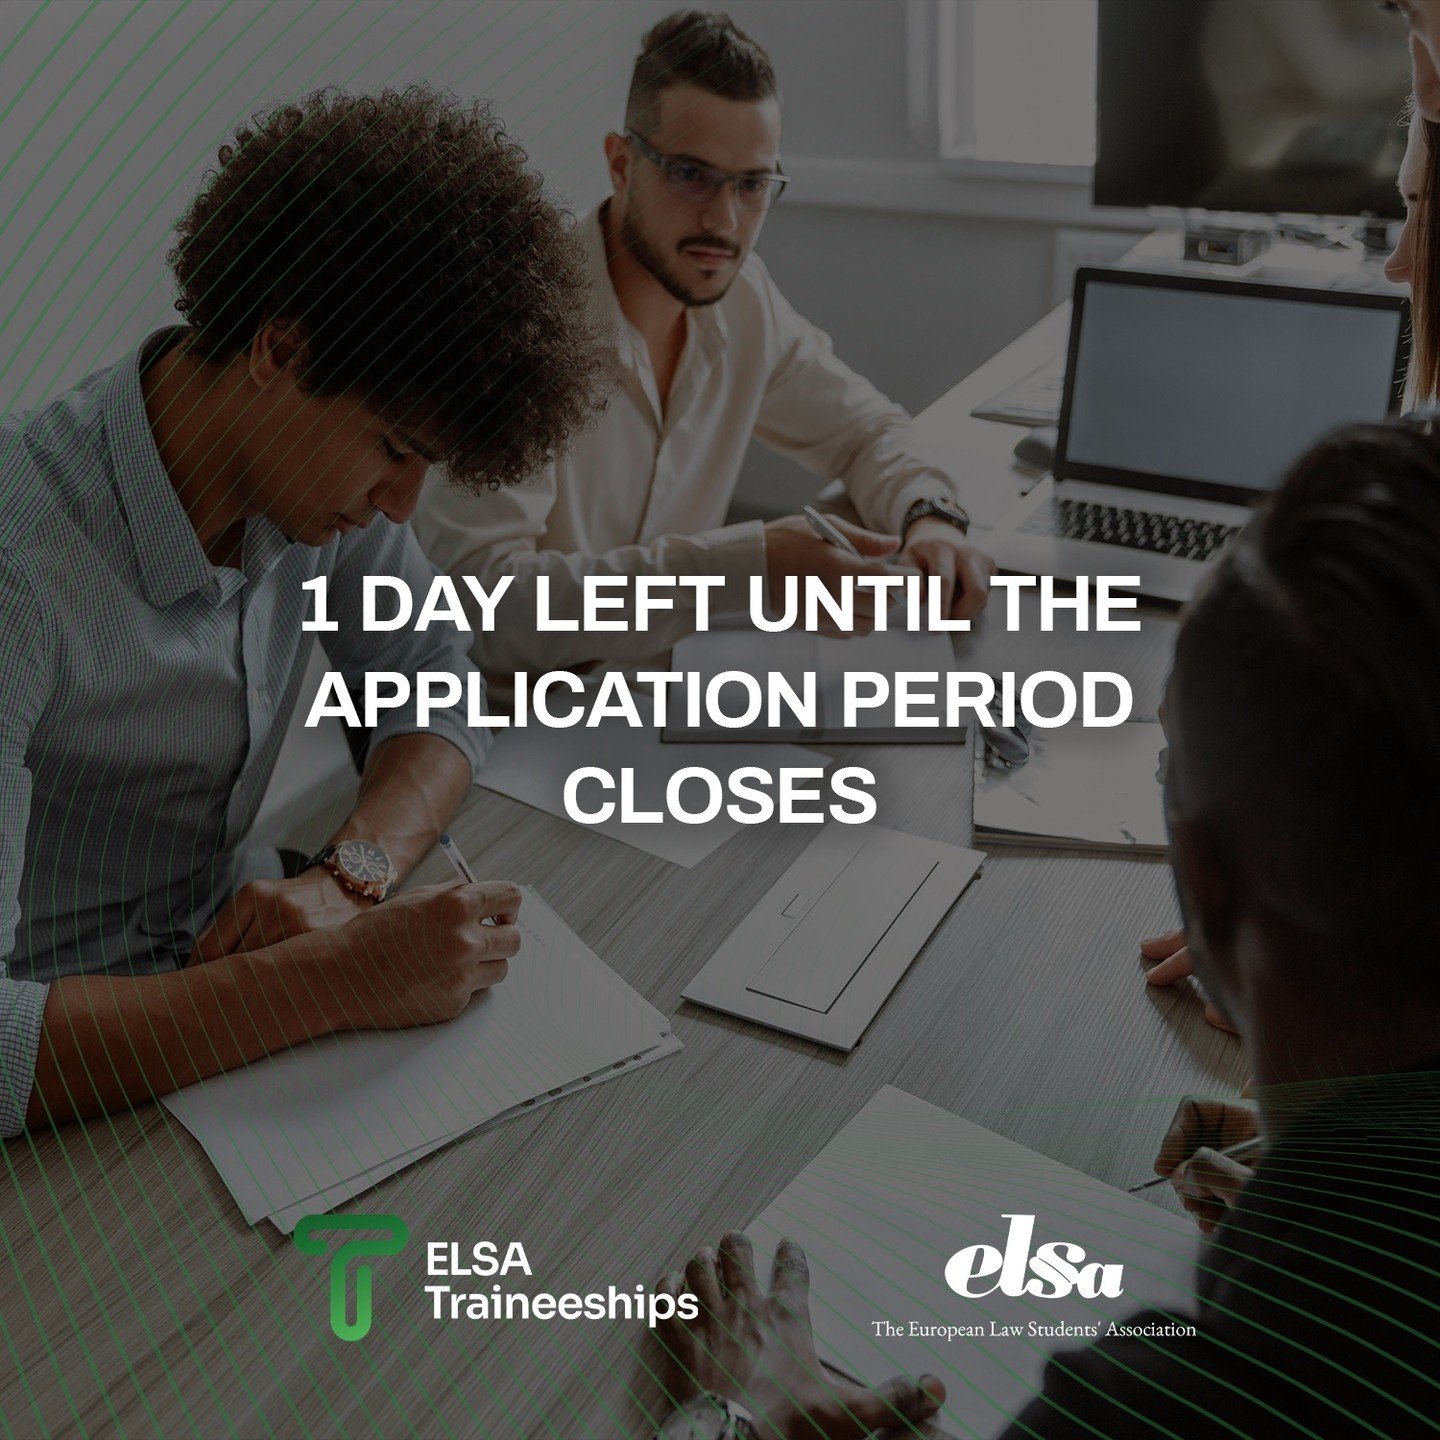 Only one day left to secure the legal work experience that will kick-start your career! 

Apply for an ELSA Traineeship before the deadline.

Prepare your CV and Motivation Letters and apply at traineeships.elsa.org until 22:59, 3rd May.